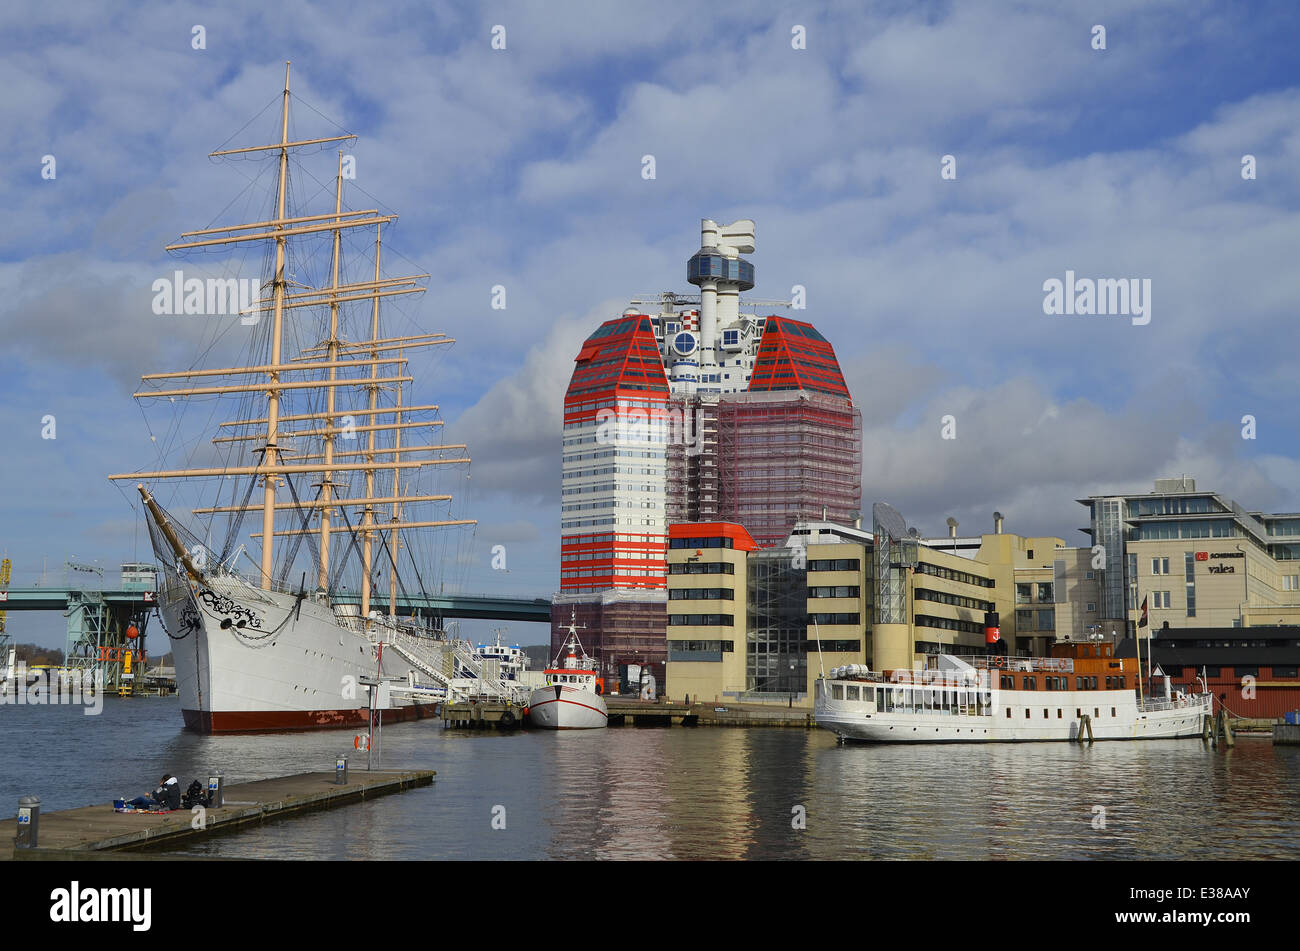 Gothenburg harbour overlooking the Lilla Bommen building and a tall ship Stock Photo